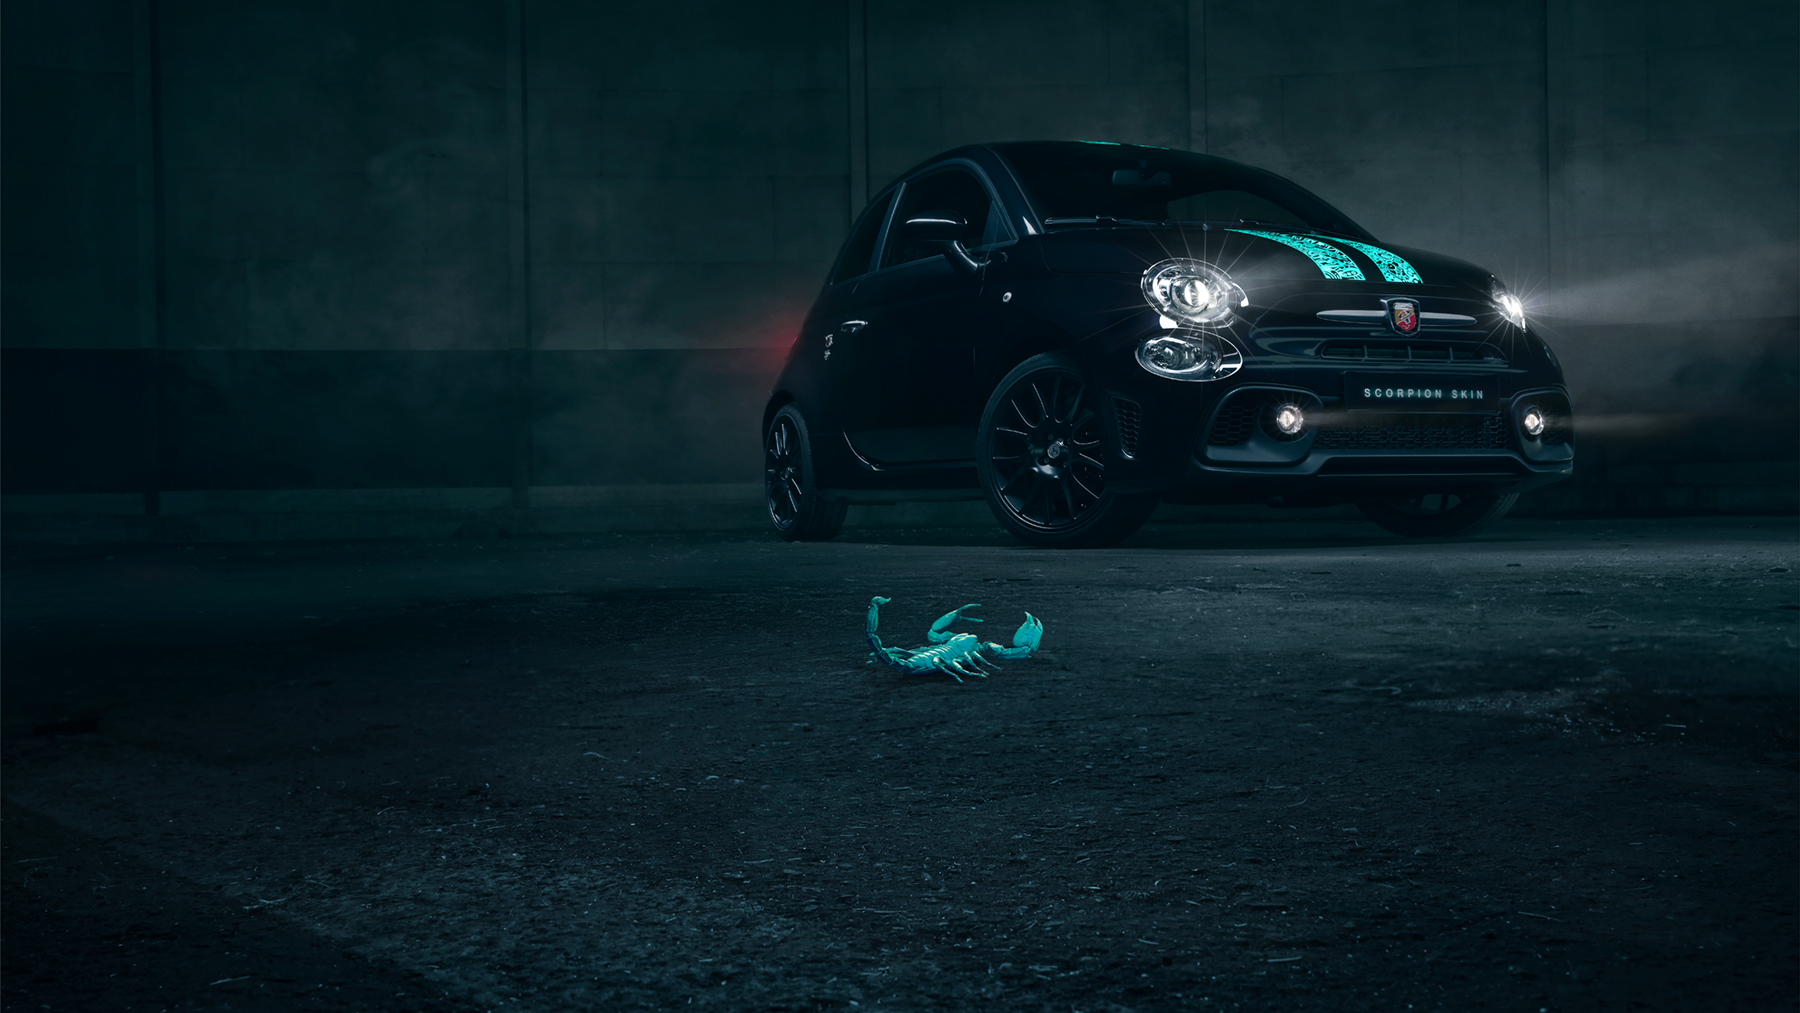 abarth shows one of a kind fiat 500 with scorpion skin paint hero 2 v5c lagen los bewerkt 1800x1013px